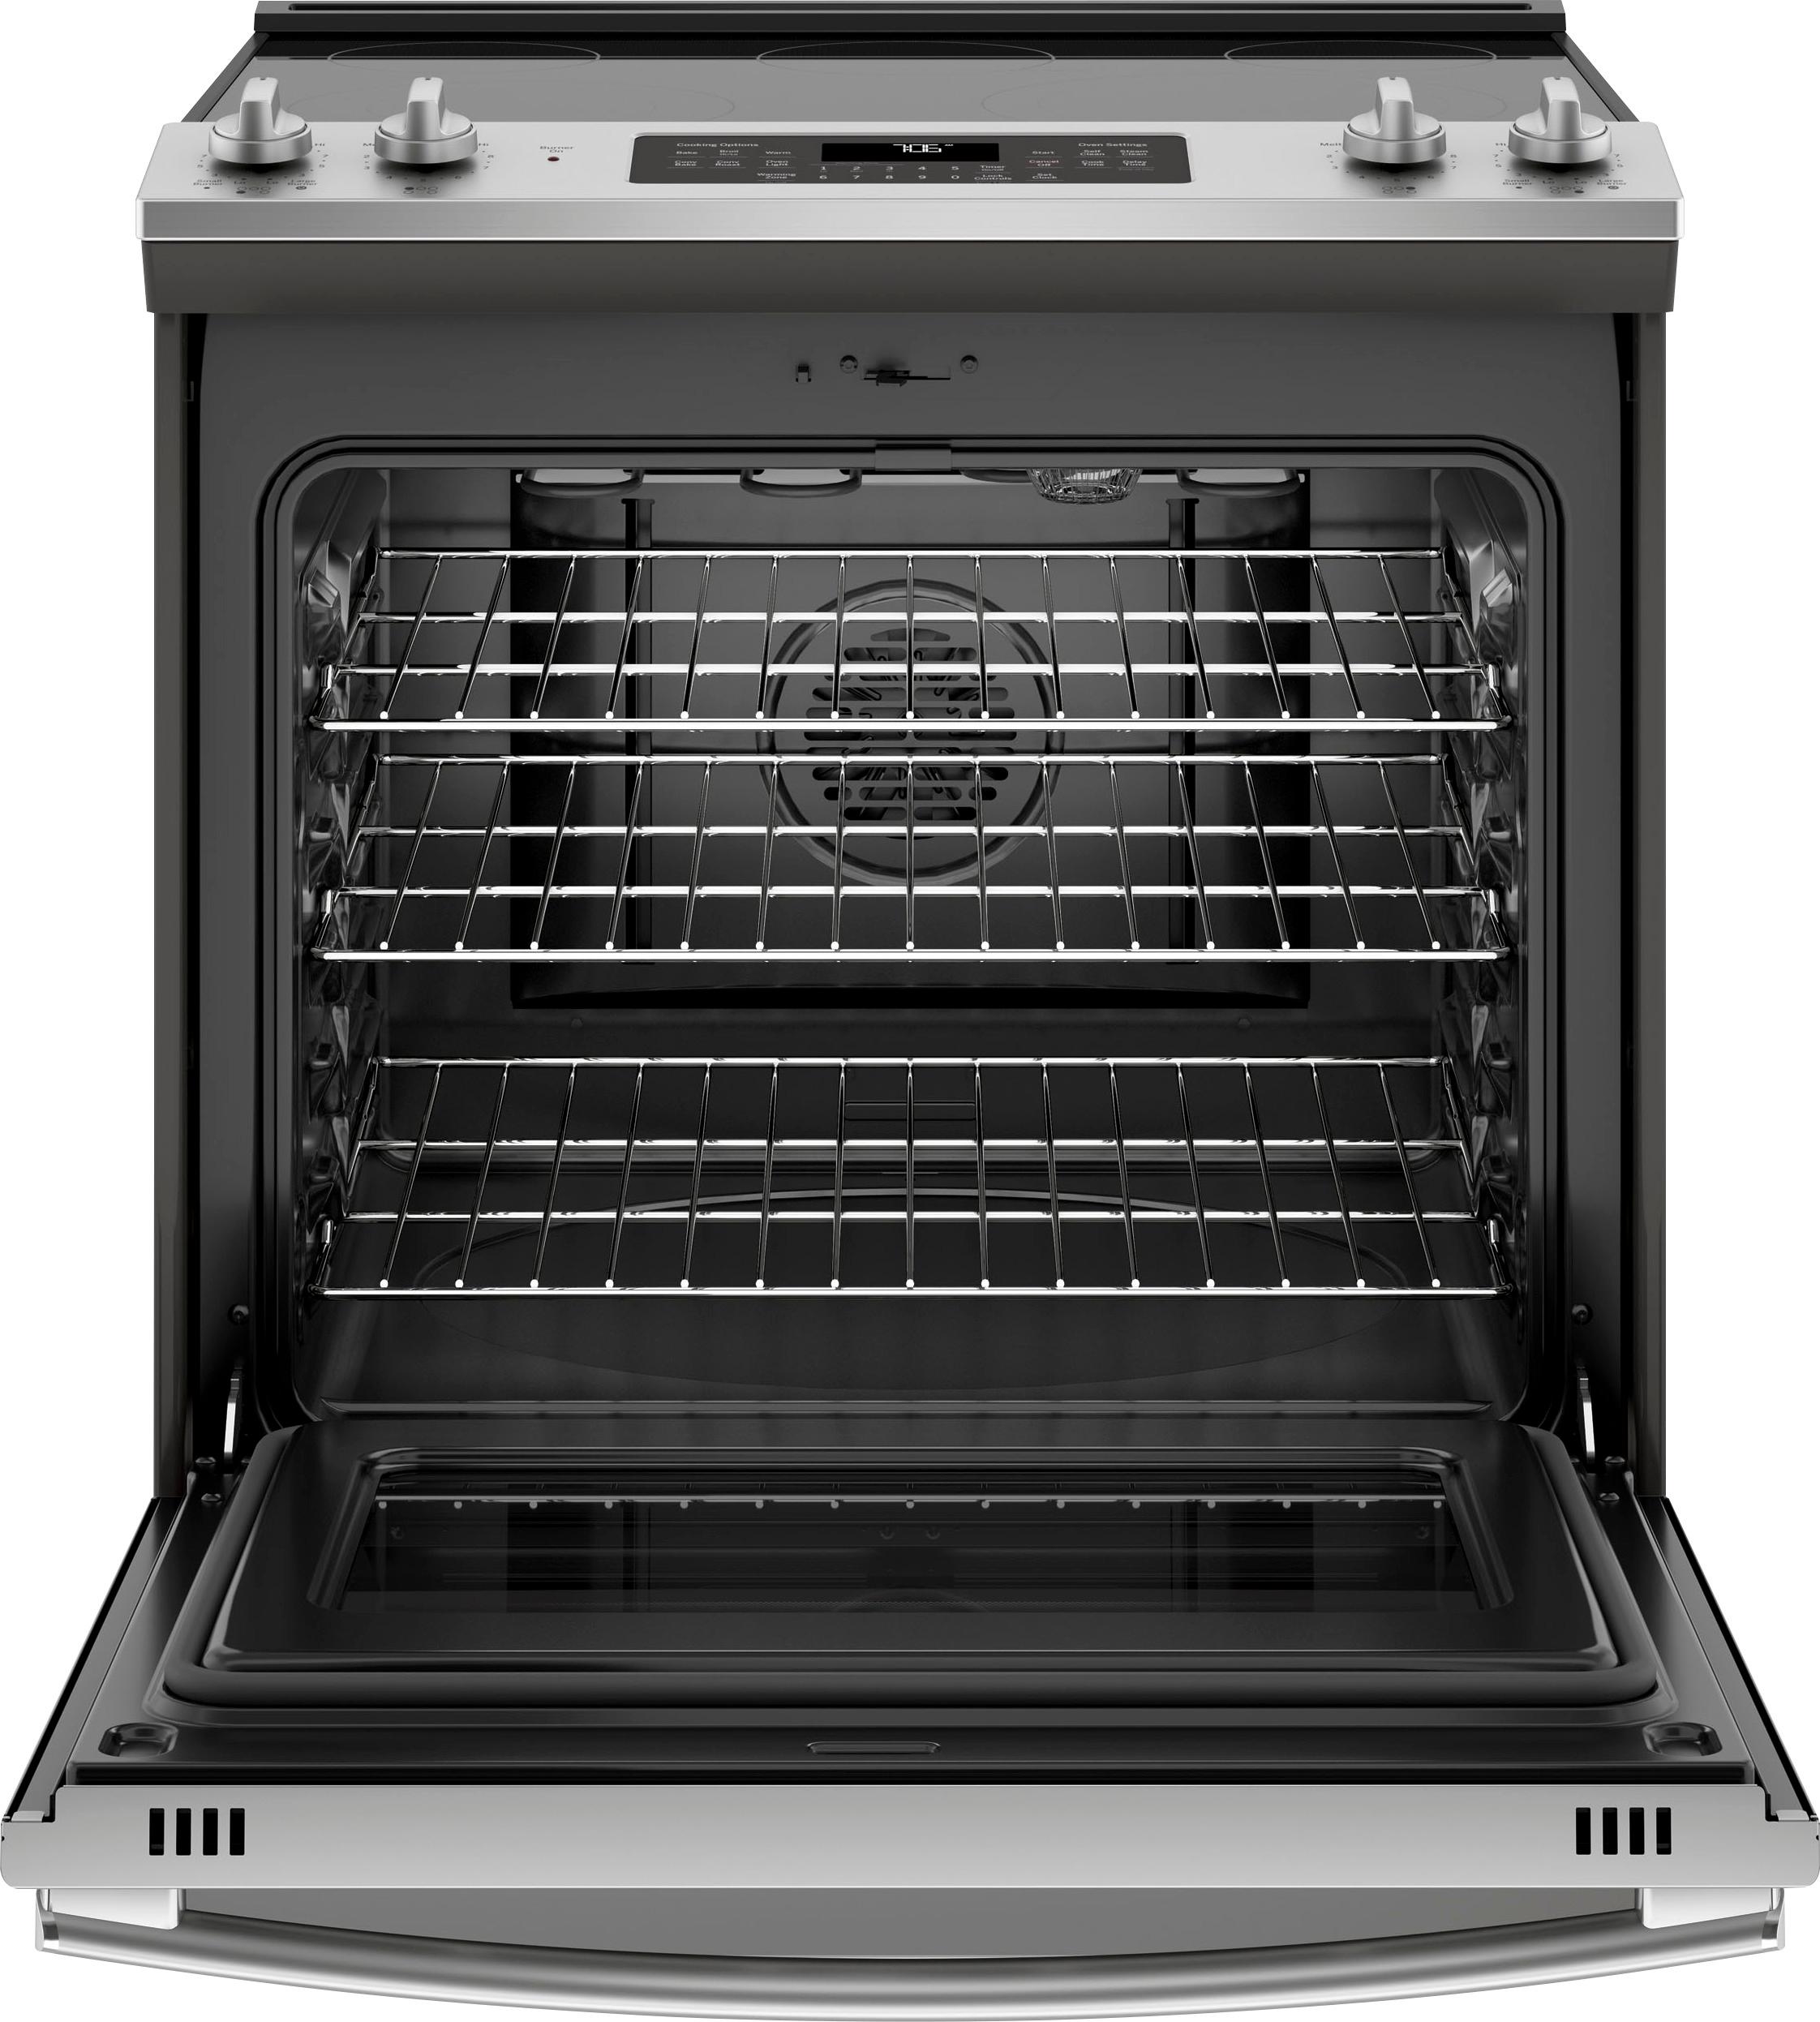 Angle View: GE - 5.0 Cu. Ft. Self-Cleaning Freestanding Electric Range - Stainless steel